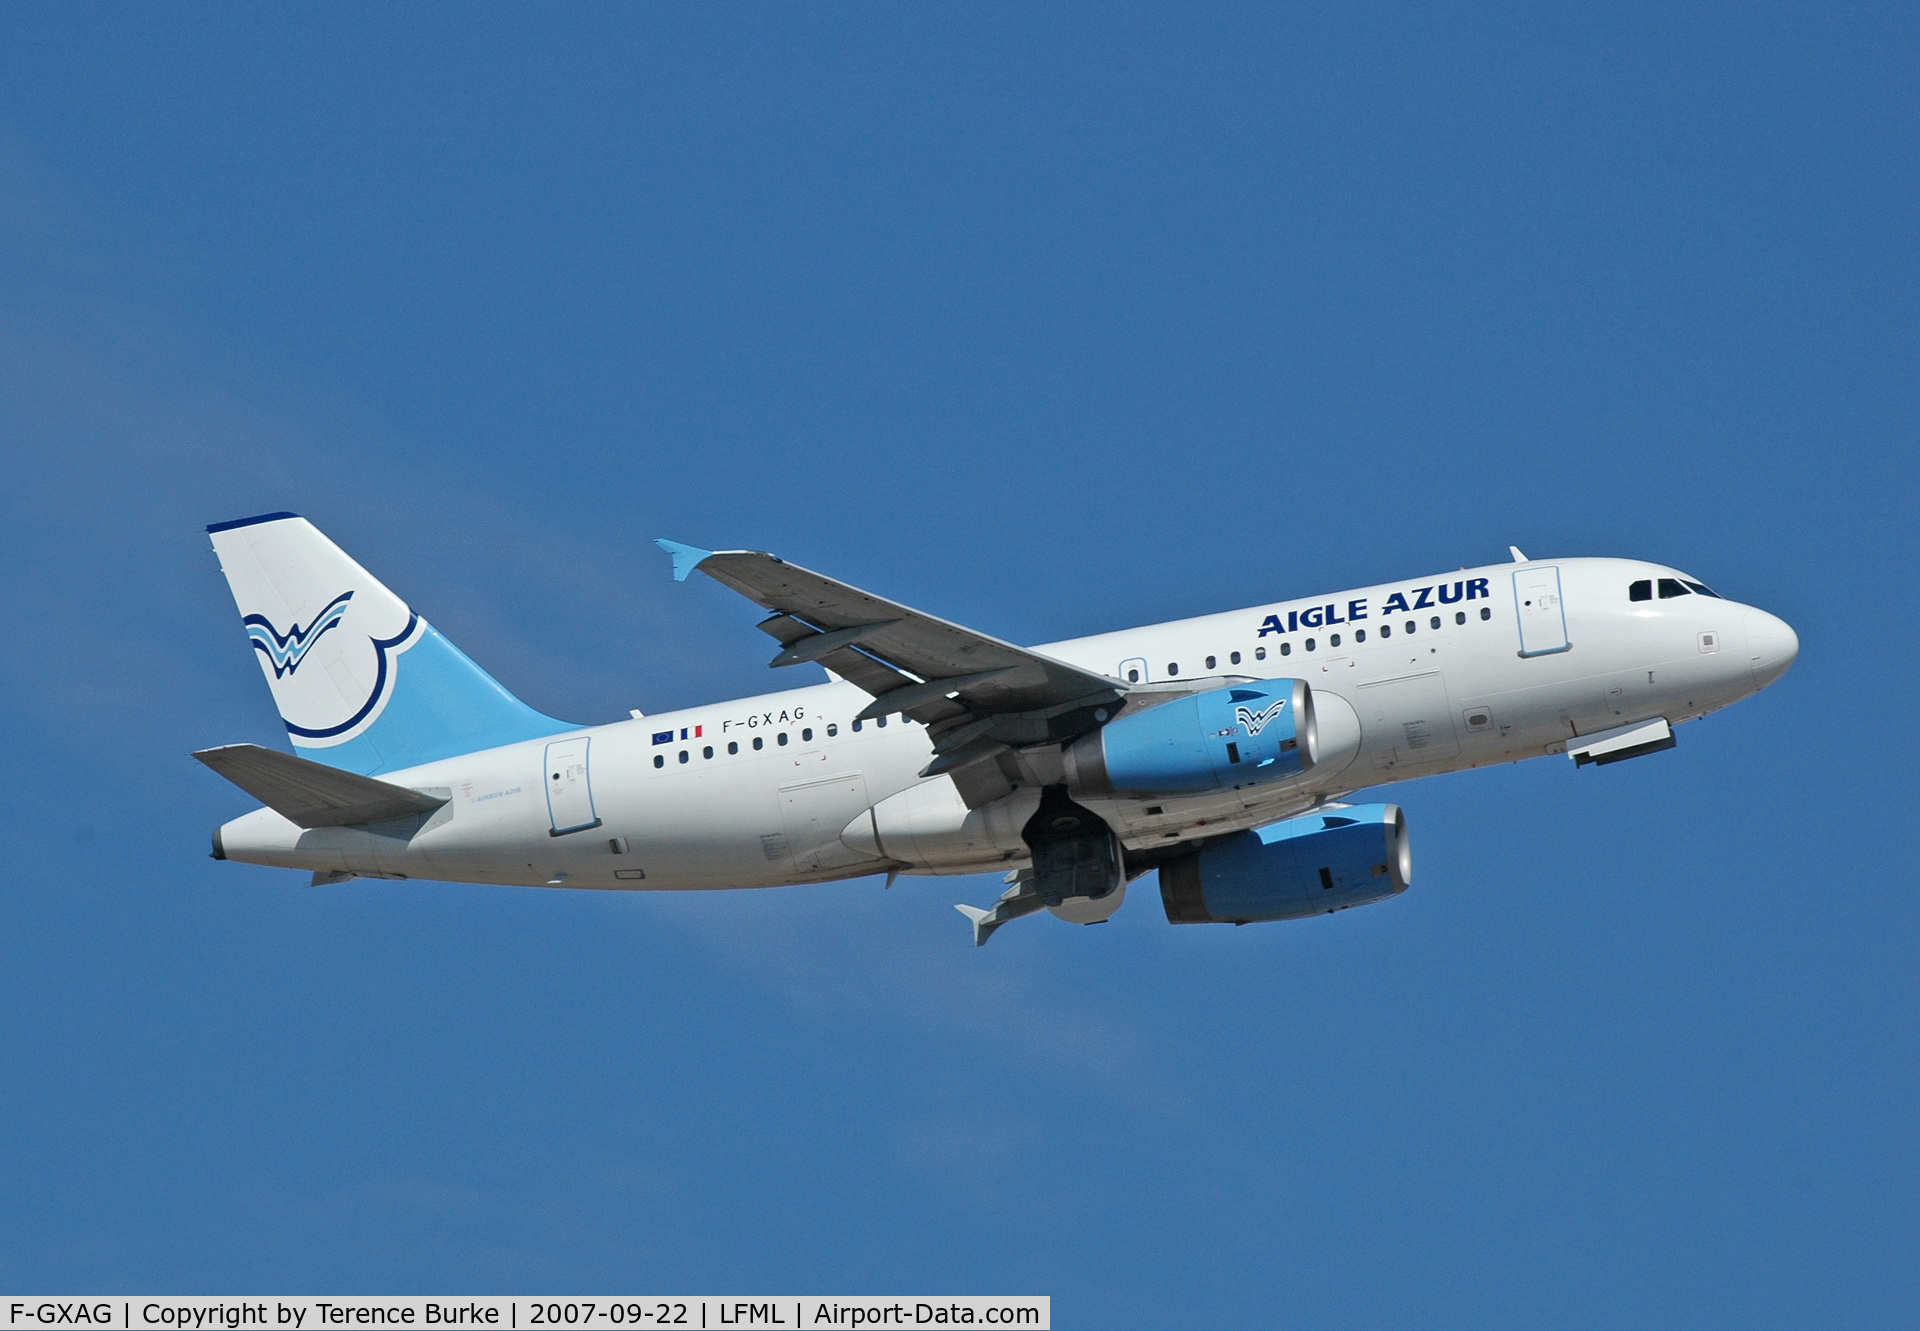 F-GXAG, 2004 Airbus A319-132 C/N 2296, Take off from 14L